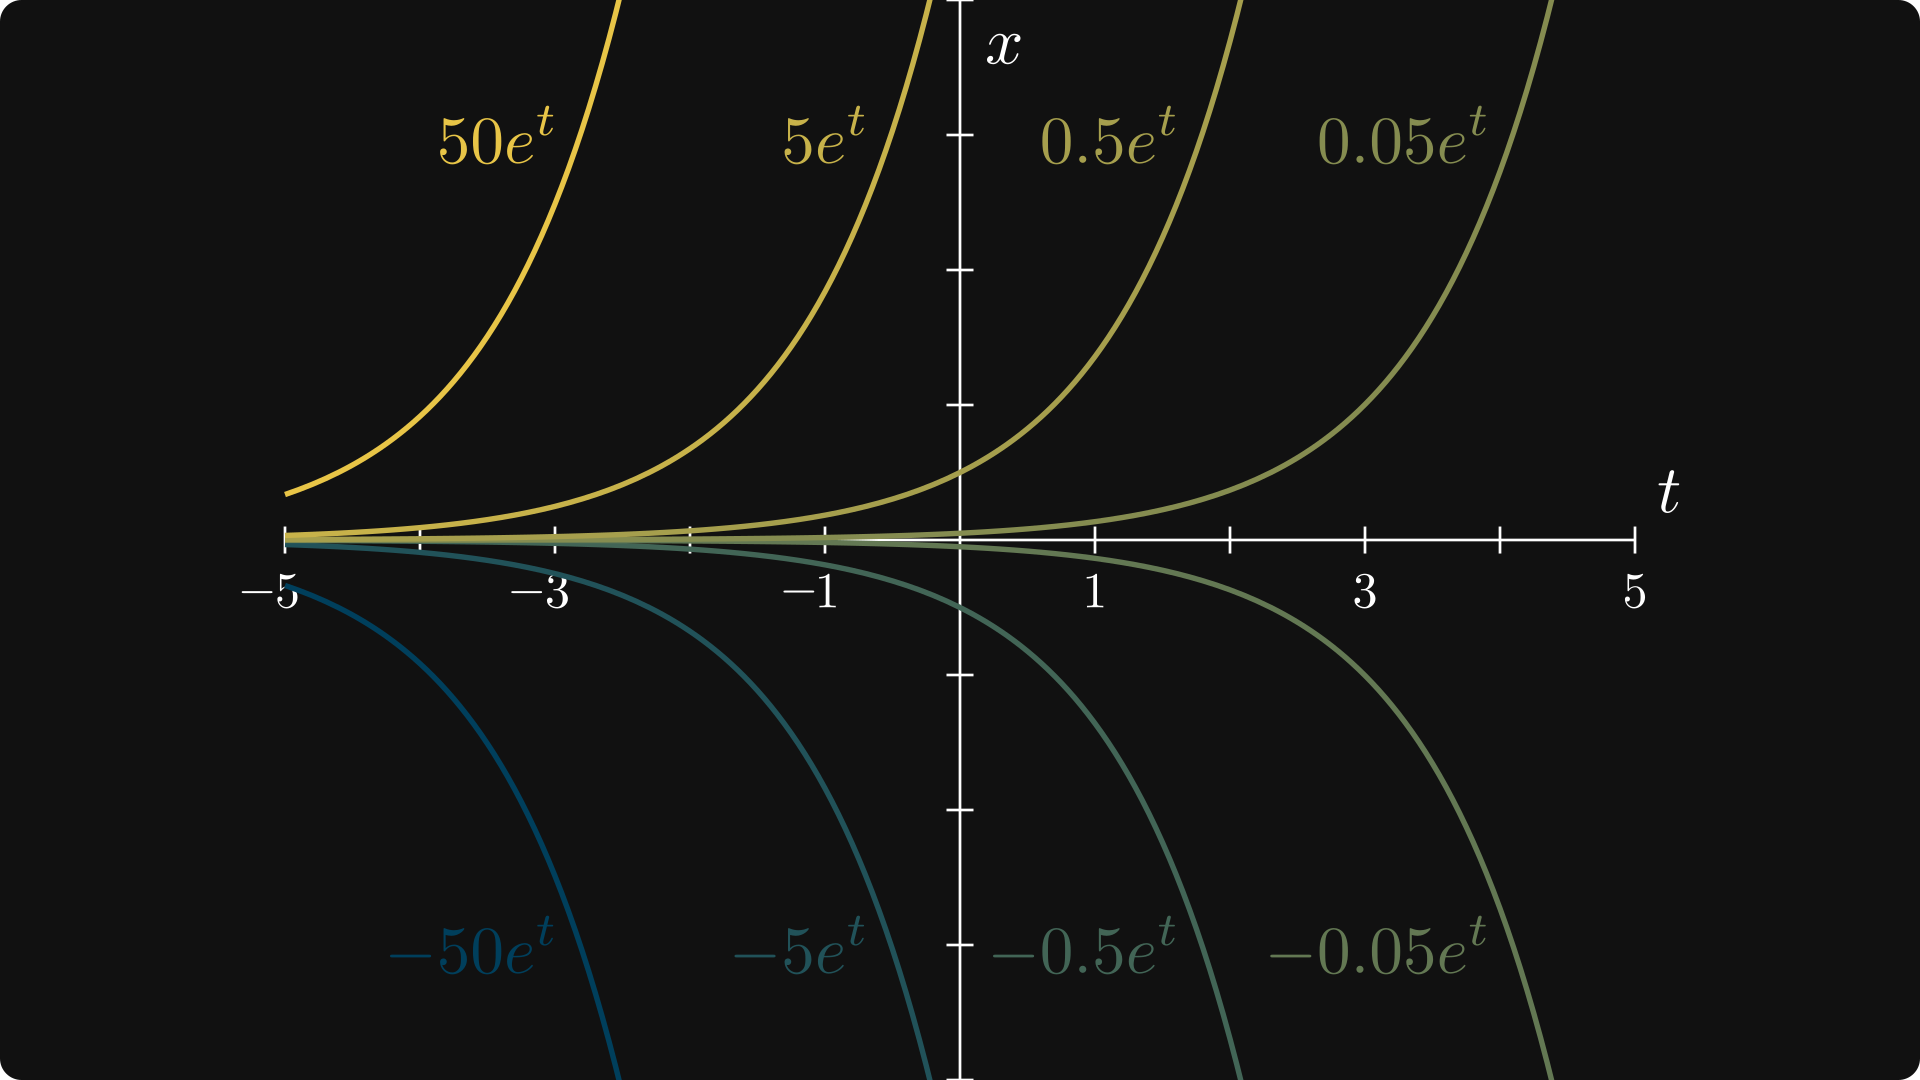 The solutions of the differential equation describing exponential growth